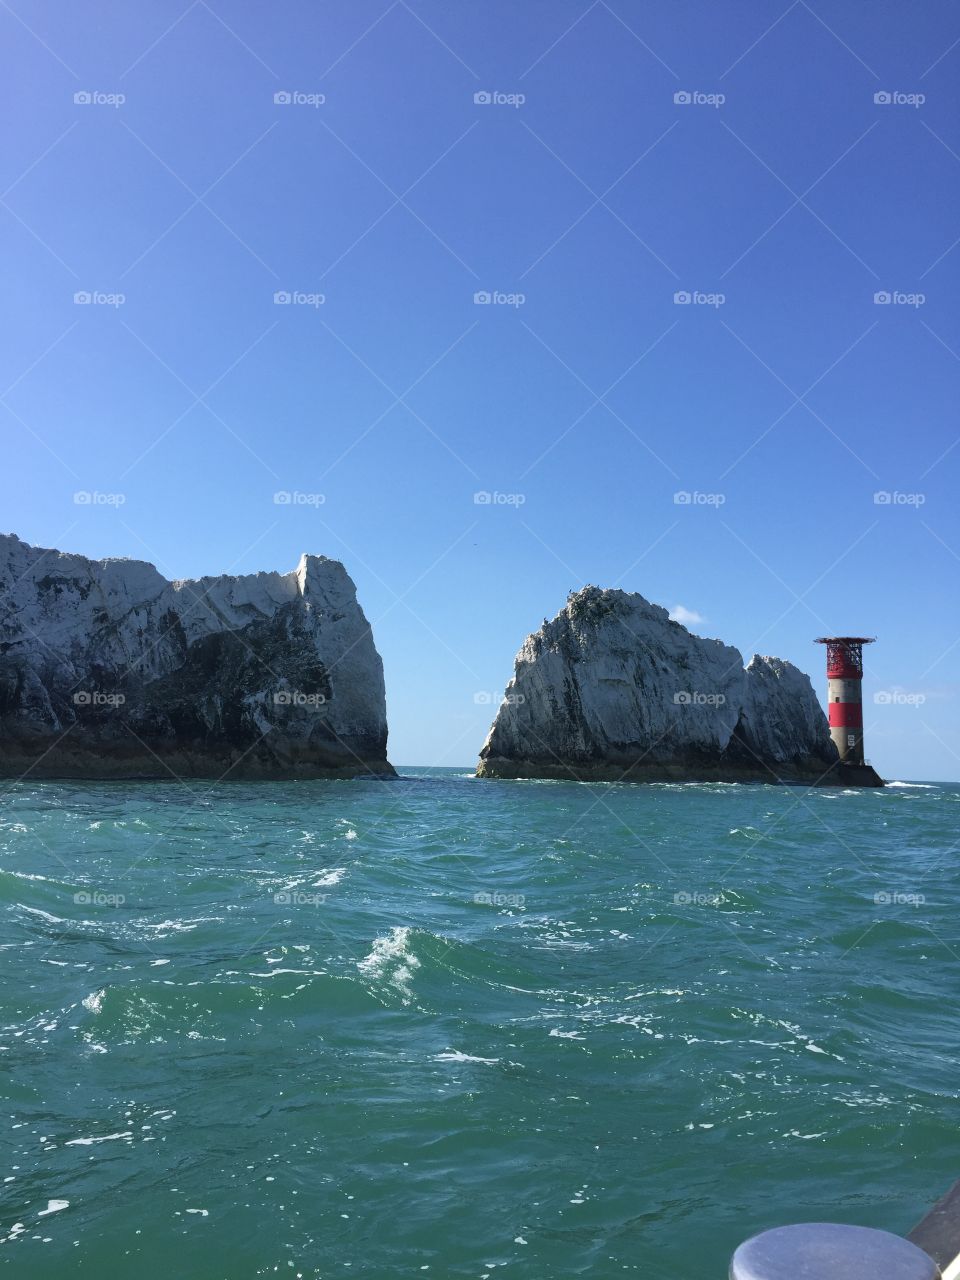 The needles, Isle of Wight.